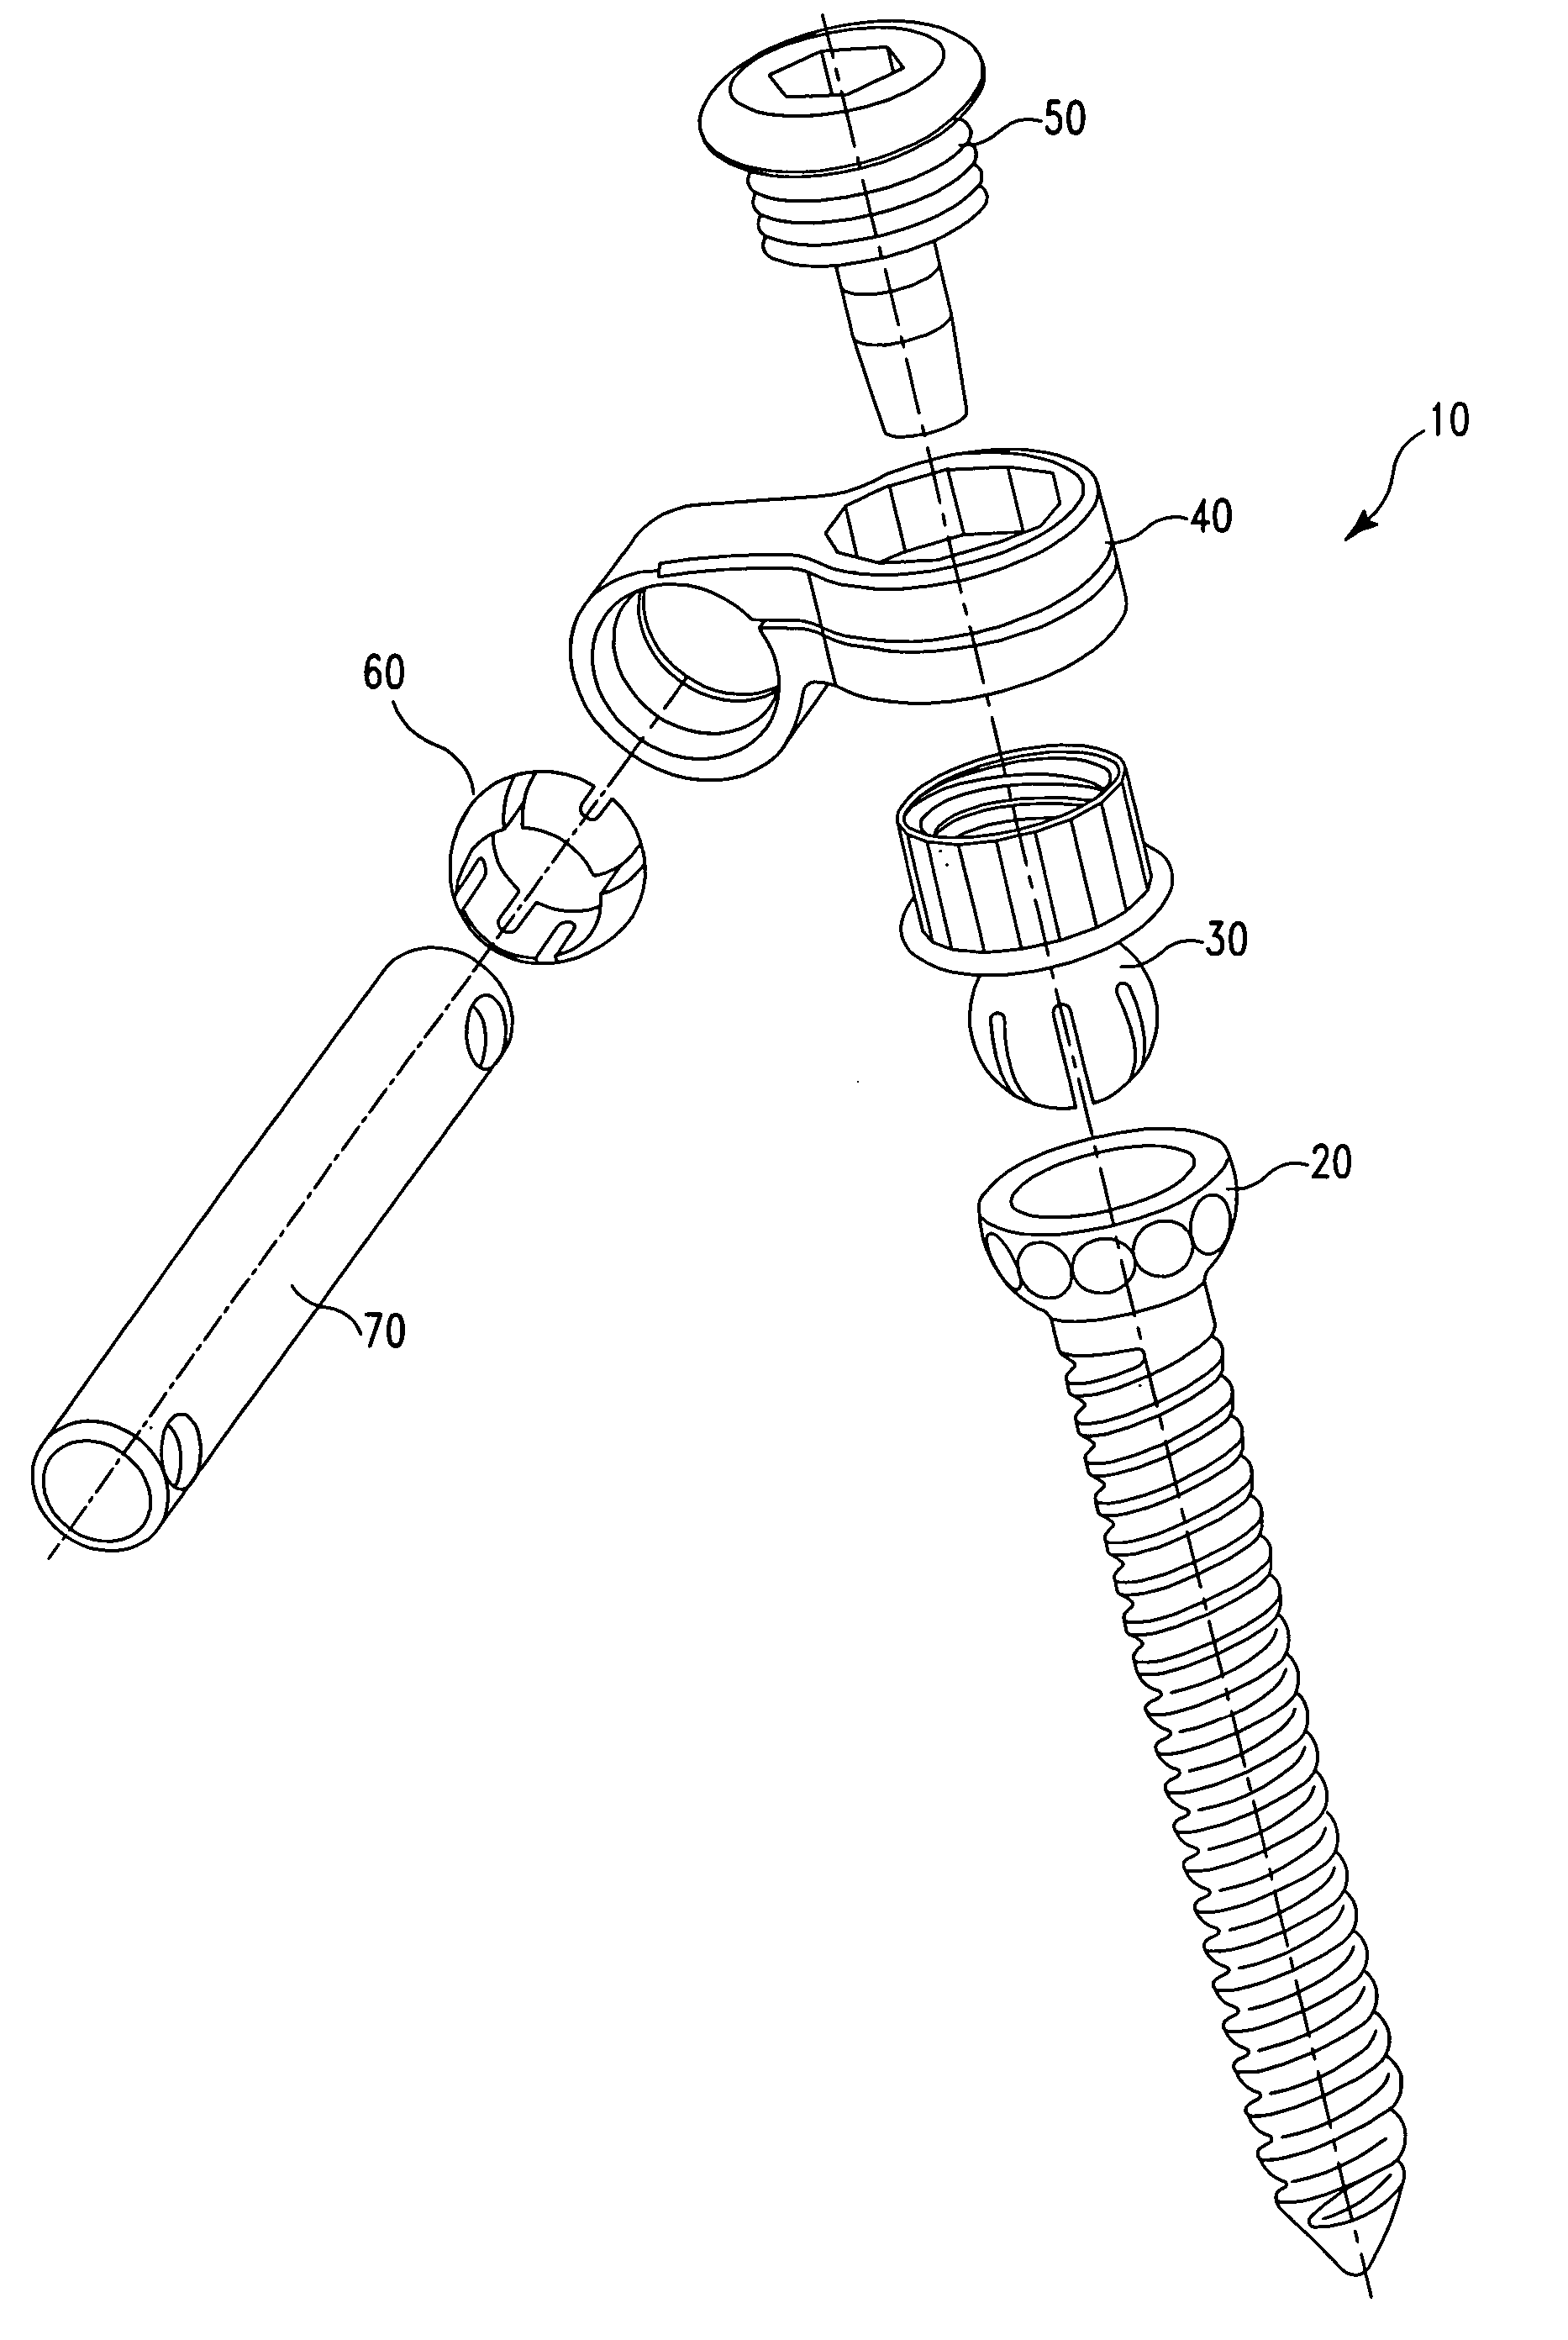 Medialised rod pedicle screw assembly